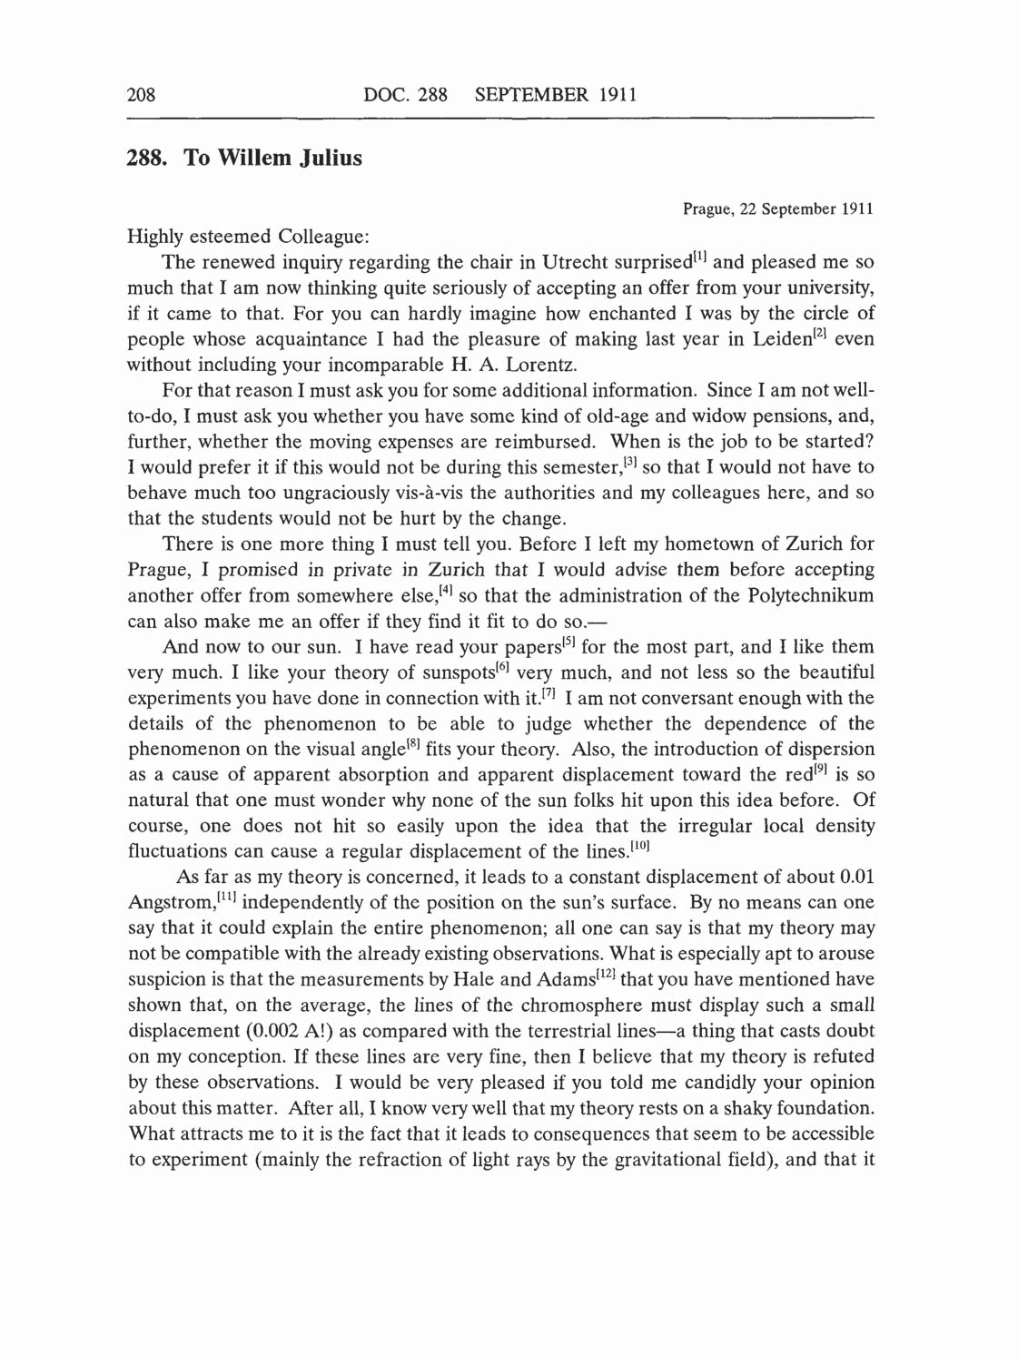 Volume 5: The Swiss Years: Correspondence, 1902-1914 (English translation supplement) page 208